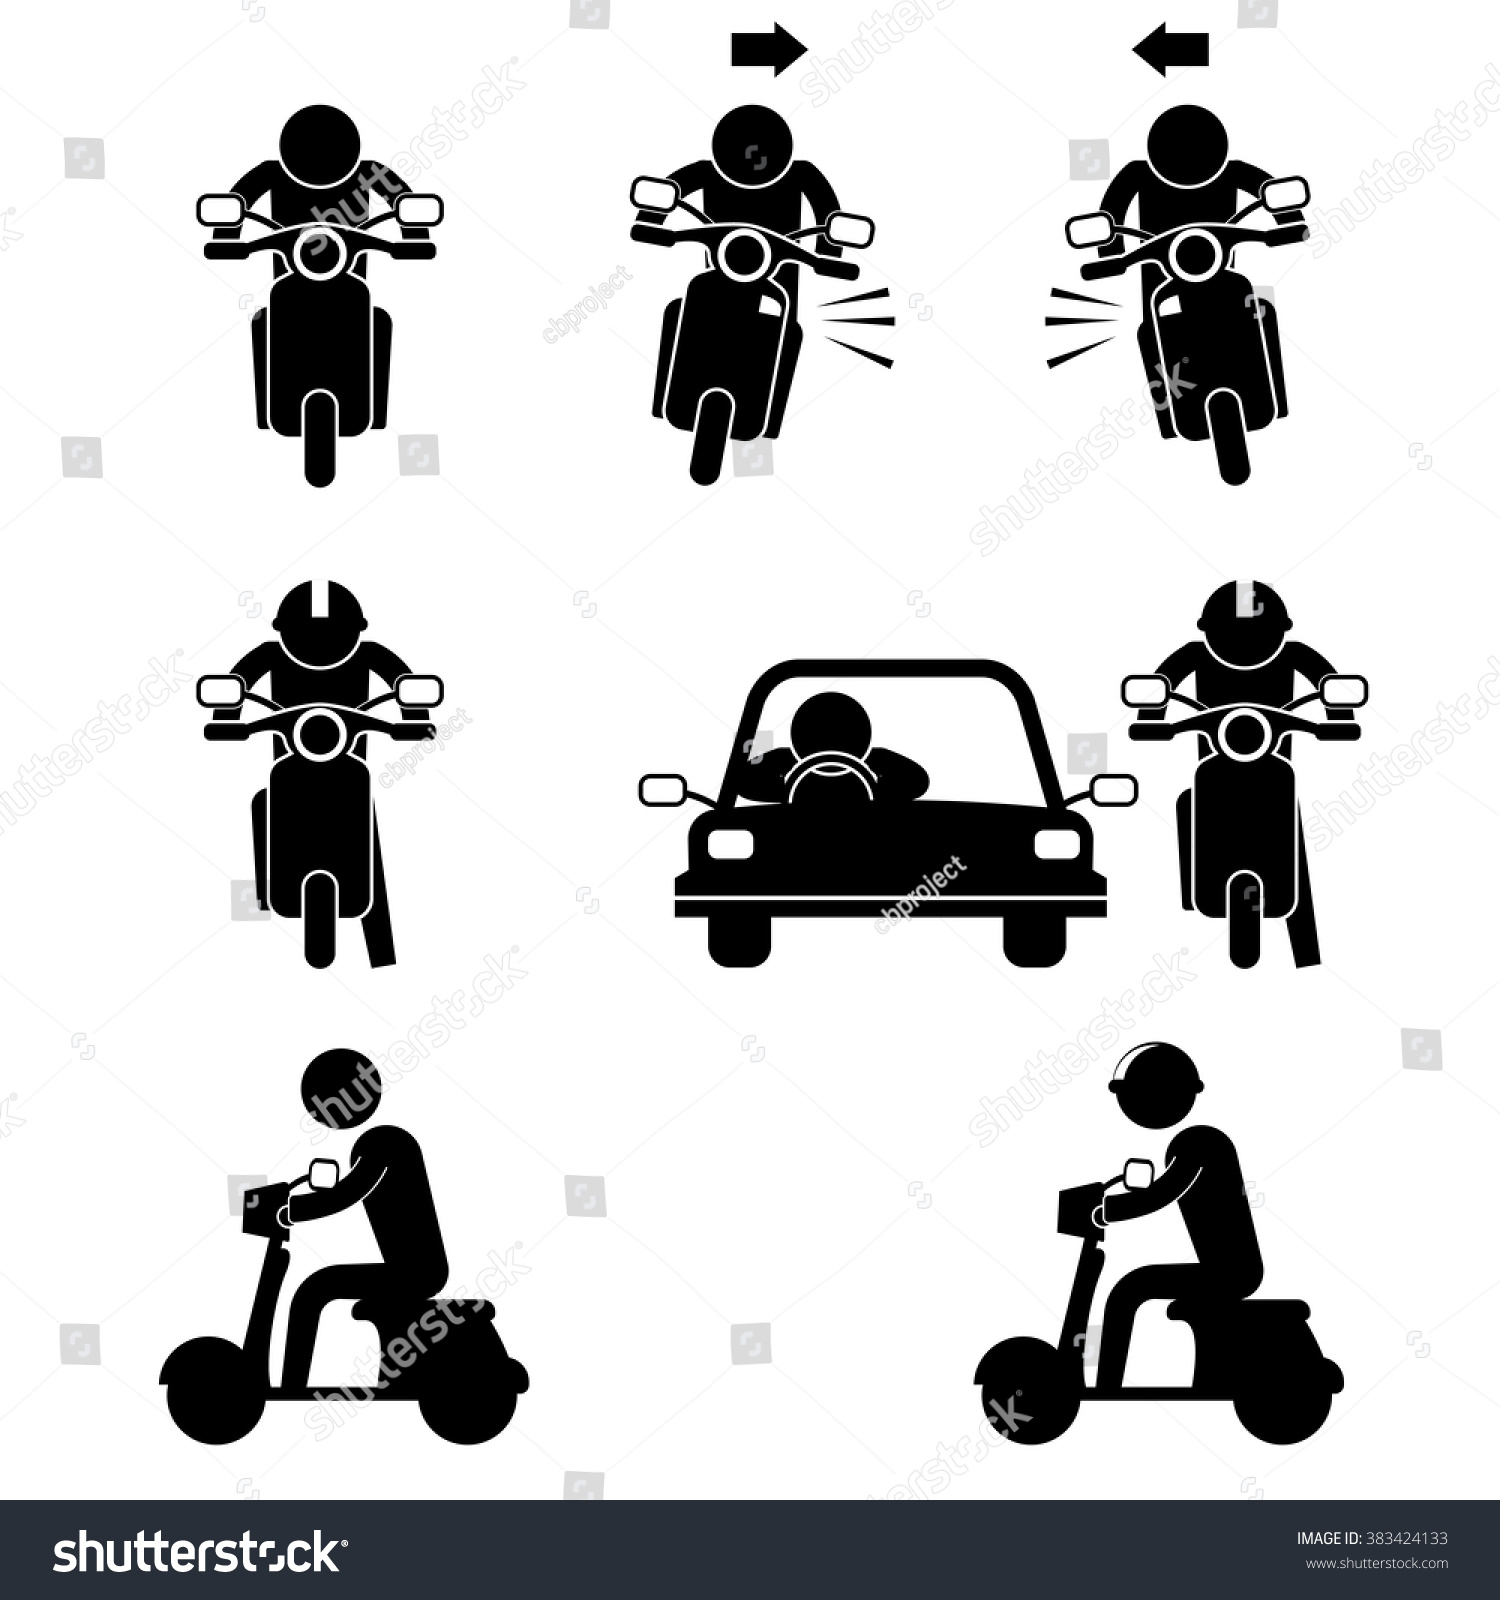 Road User Motorcycle Car Icon Sign Stock Vector 383424133 - Shutterstock